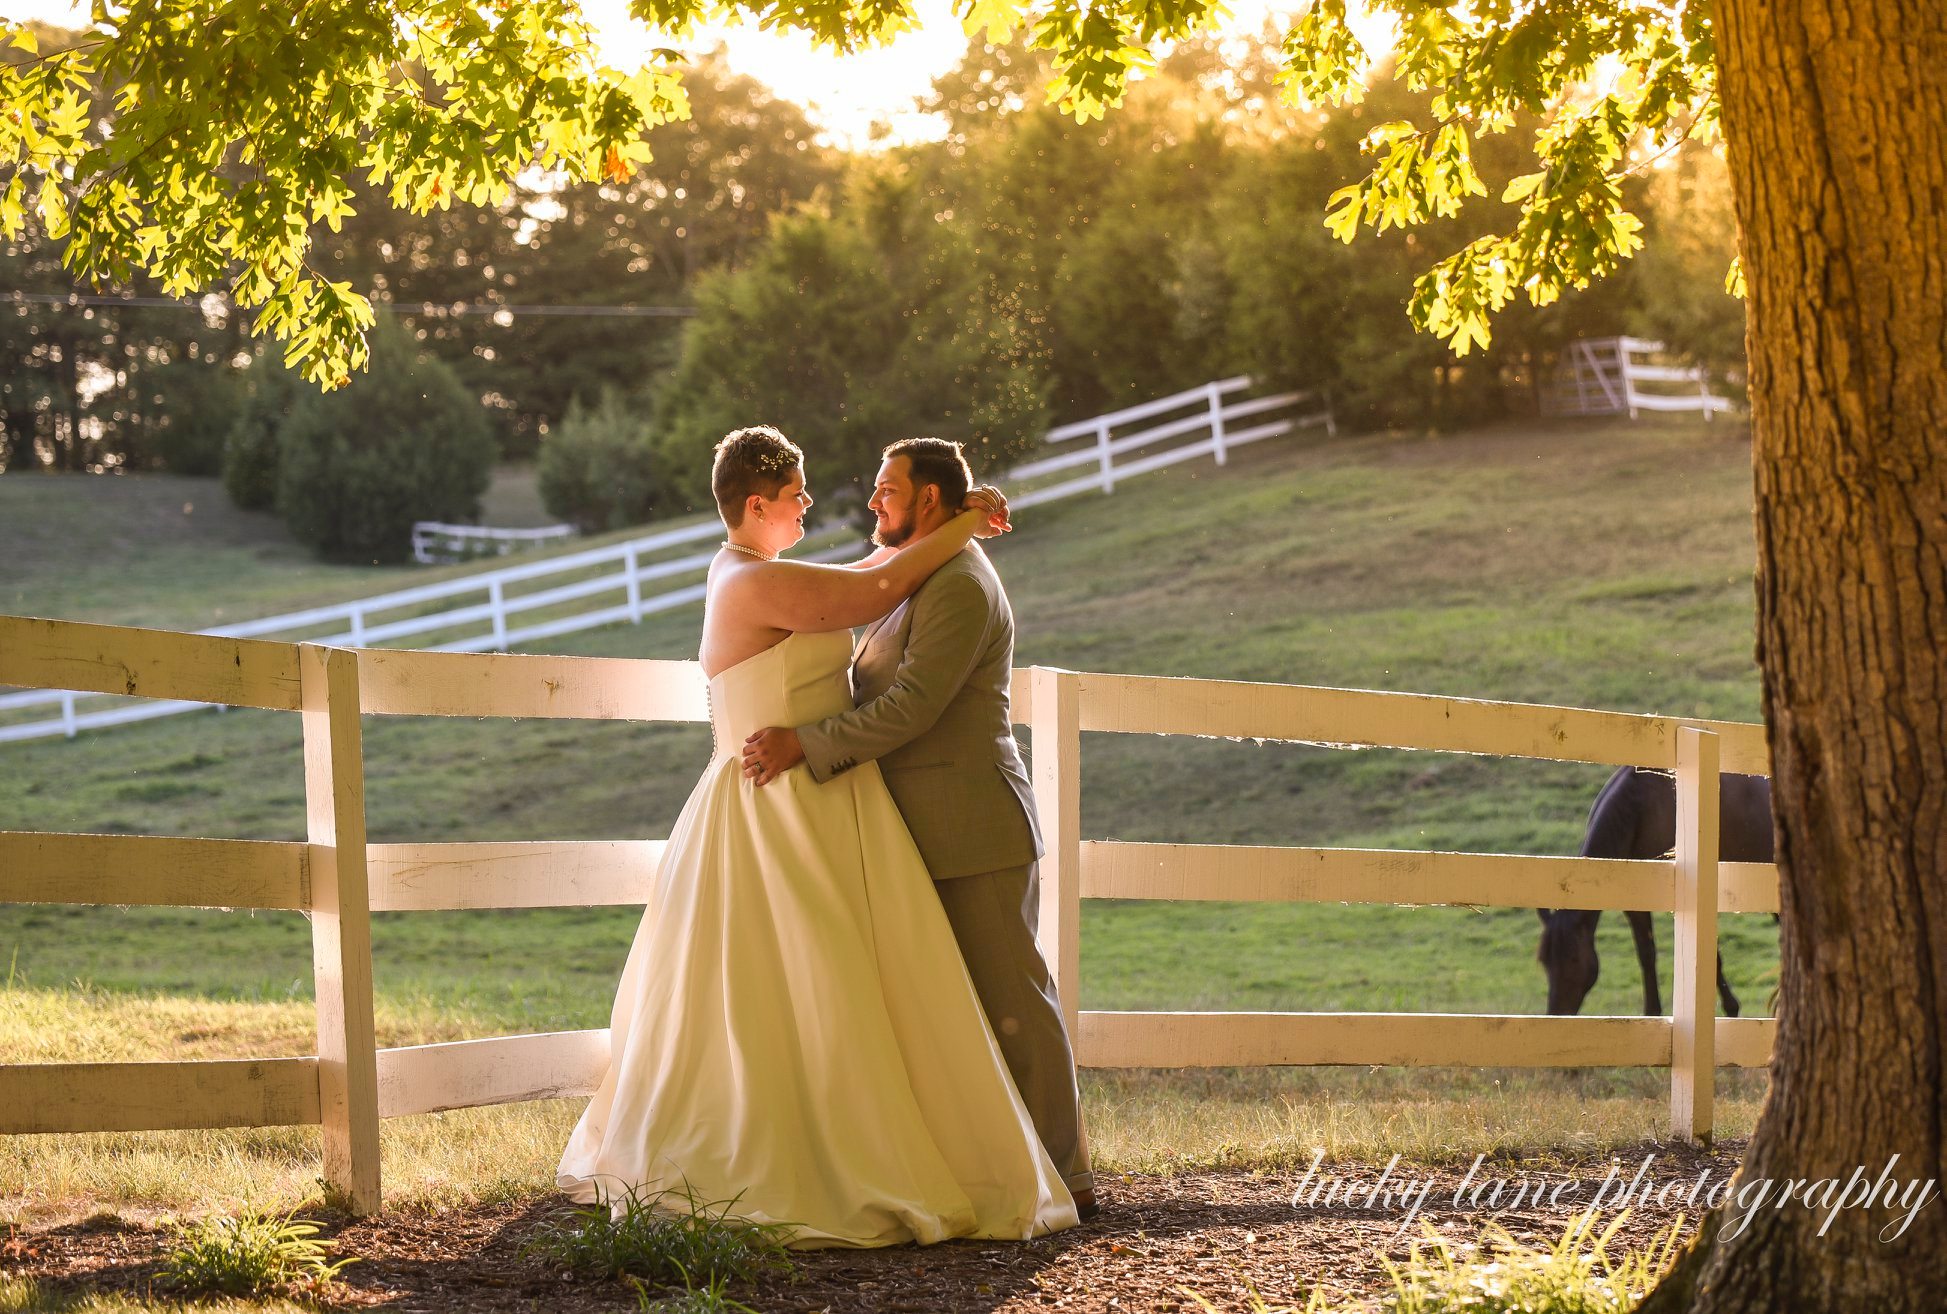 Bride and groom pose in front of pasture during sunset.